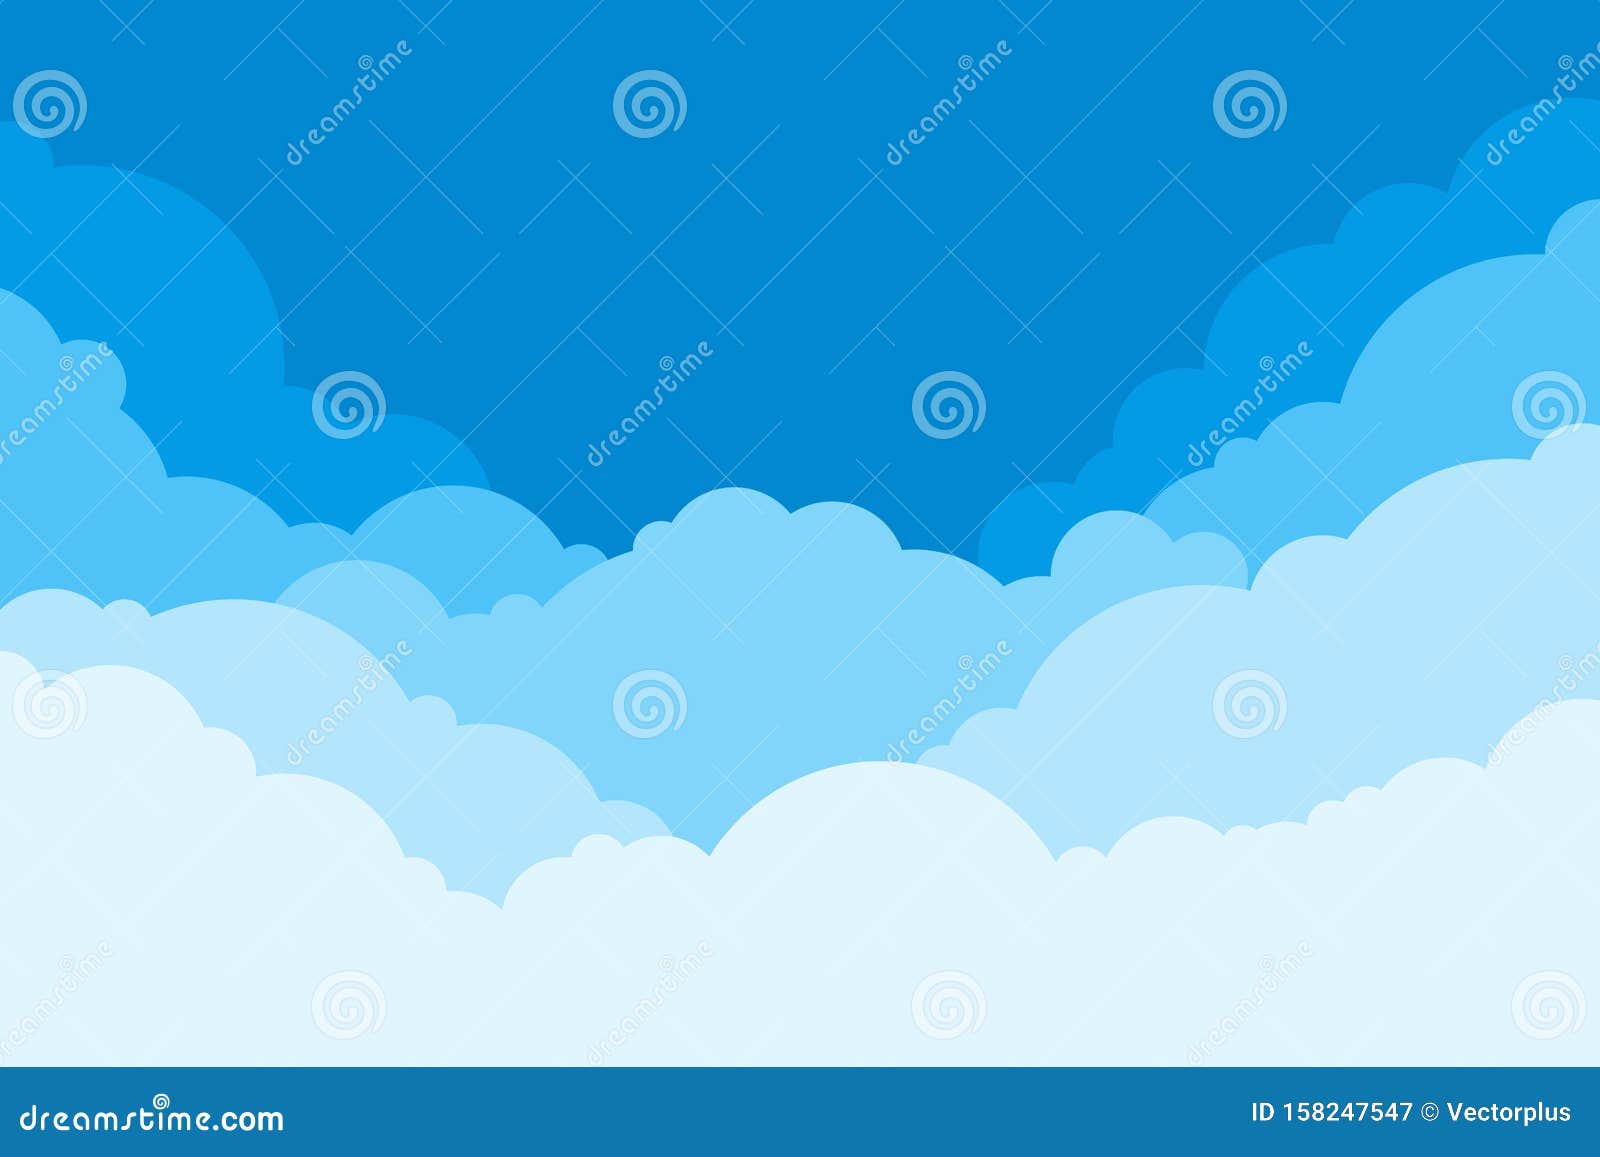 Blue Sky with Clouds. Cartoon Background. Bright Illustration for Design.  Kids Cloud Background Stock Vector - Illustration of dream, bright:  158247547